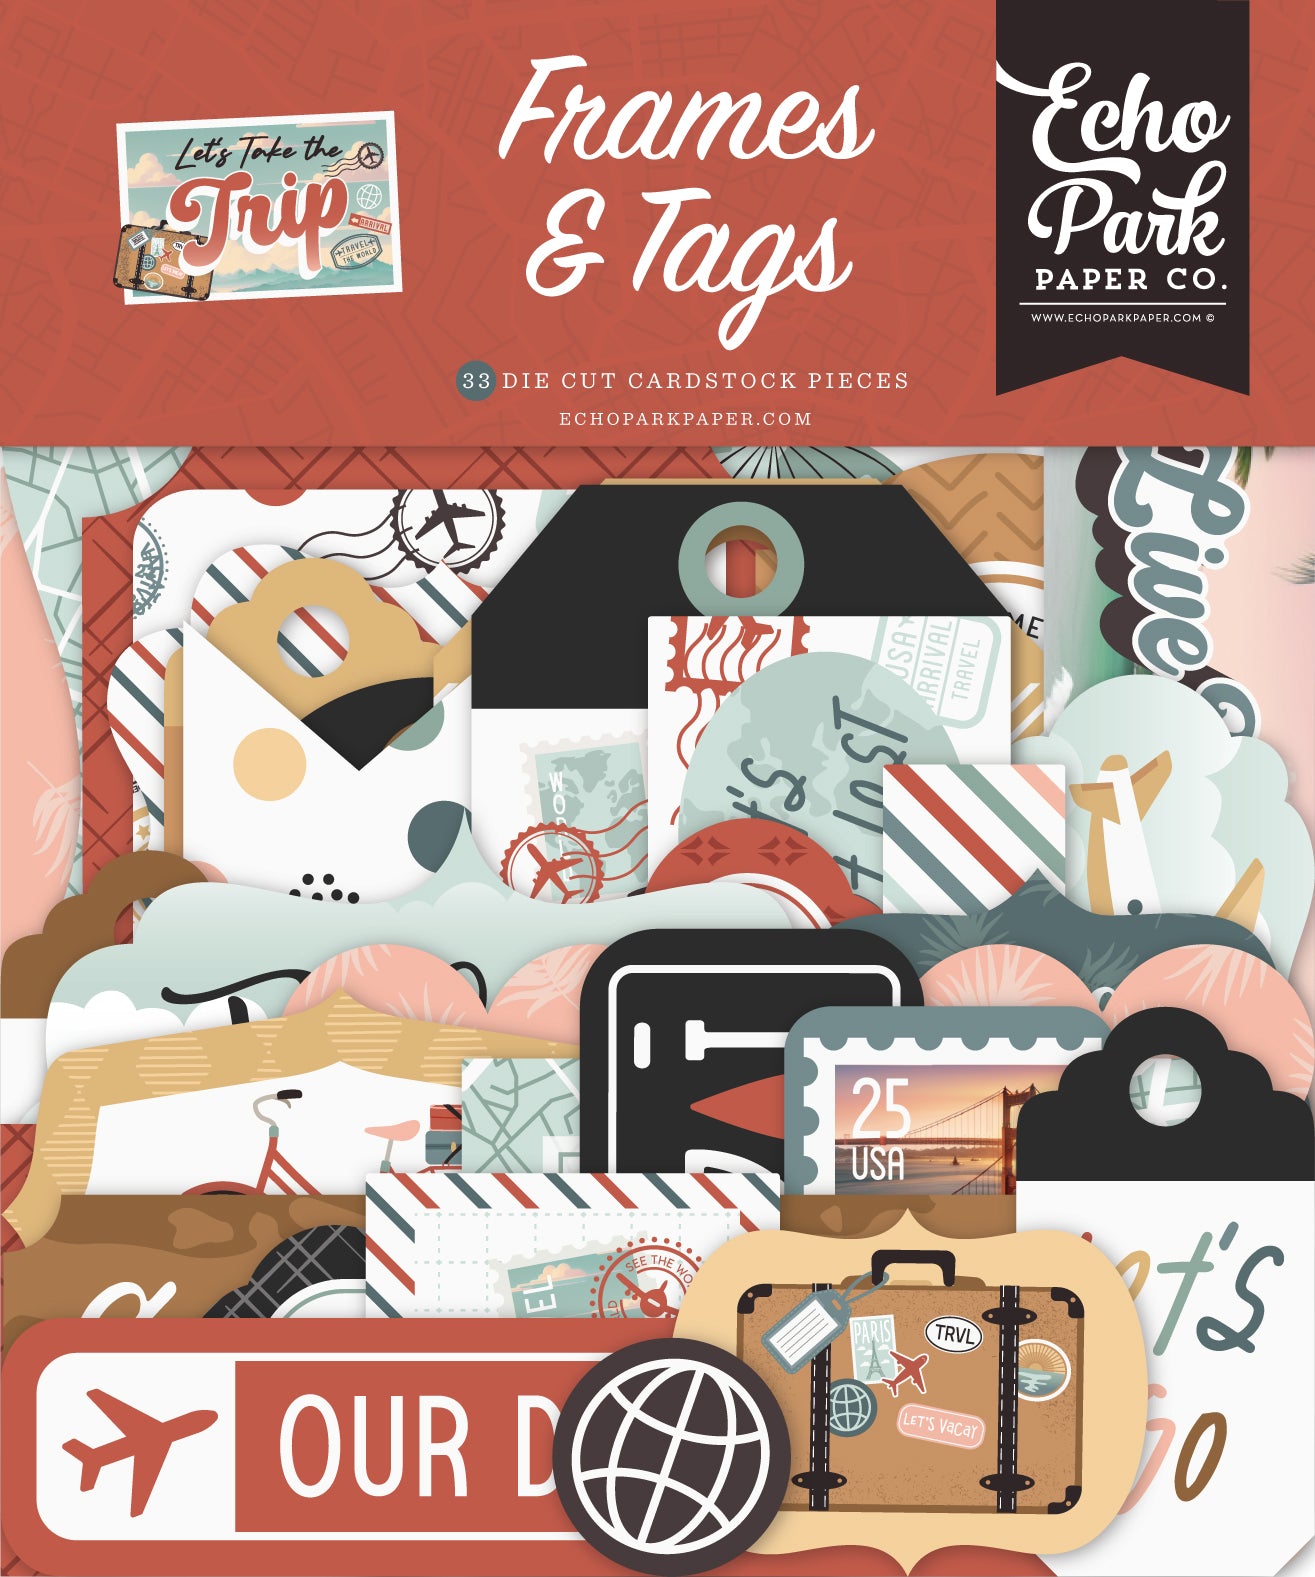 Let's Take the Trip Collection 5x5 Scrapbook Frames & Tags by Echo Park Paper